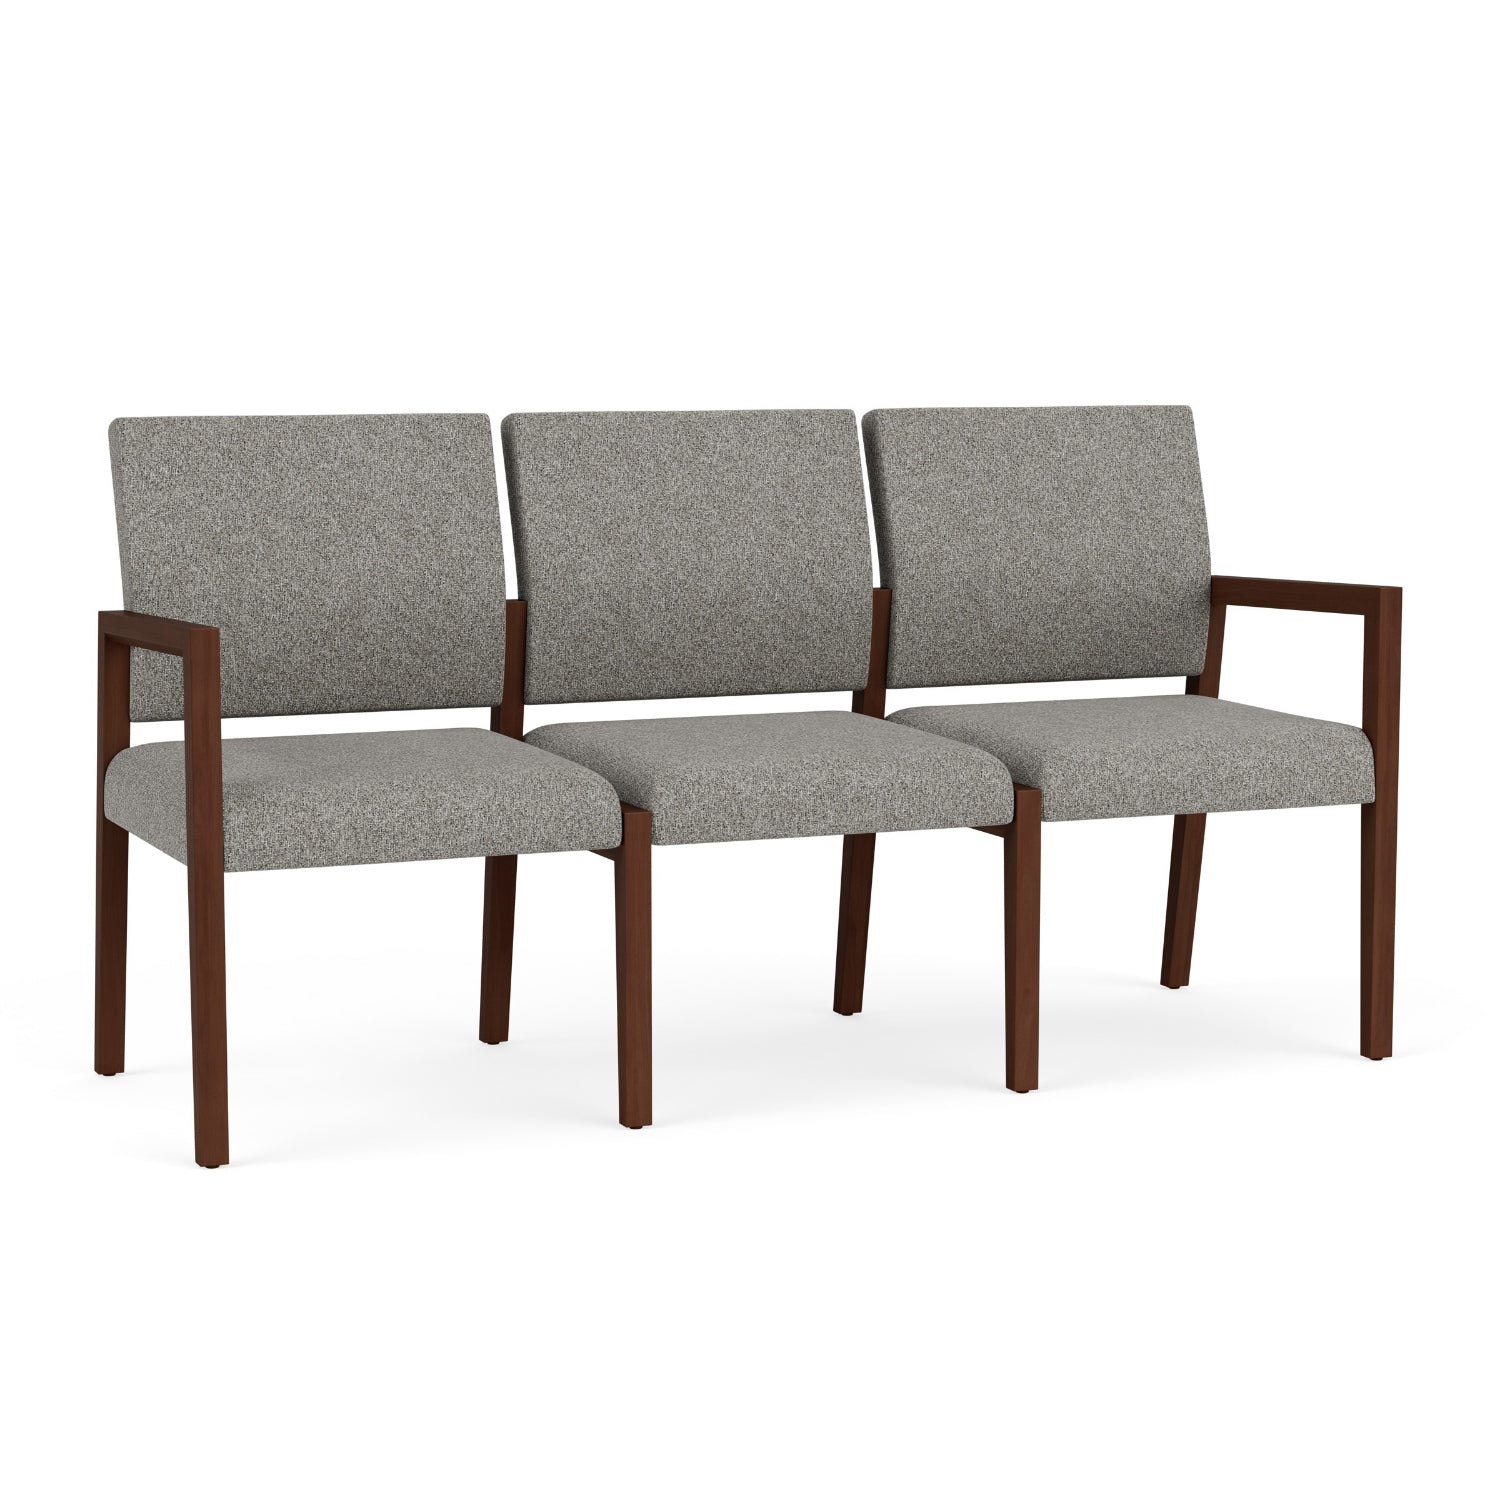 Brooklyn Collection Reception Seating, 3 Seat Sofa, Standard Fabric Upholstery, FREE SHIPPING